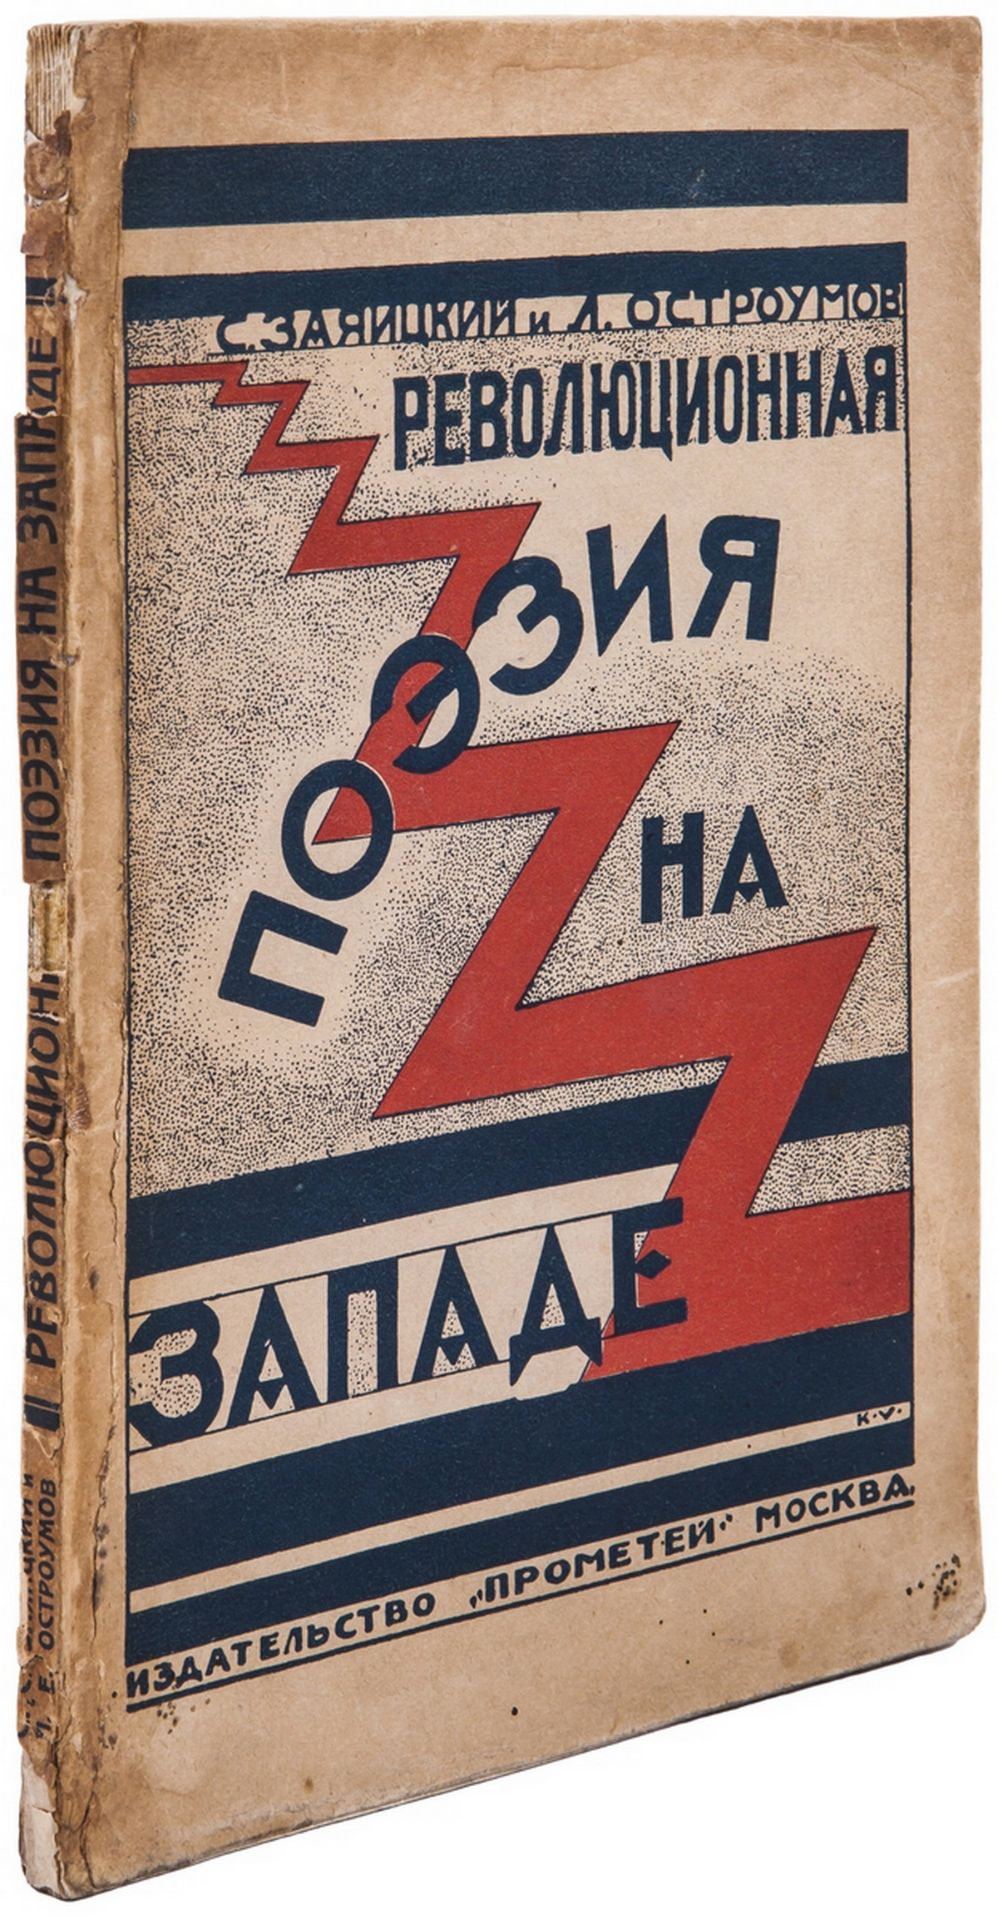 [USSR art. Constructivism]. Revolutionary poetry in the West / [Illustrated cover by K.V.]. - [Mosco